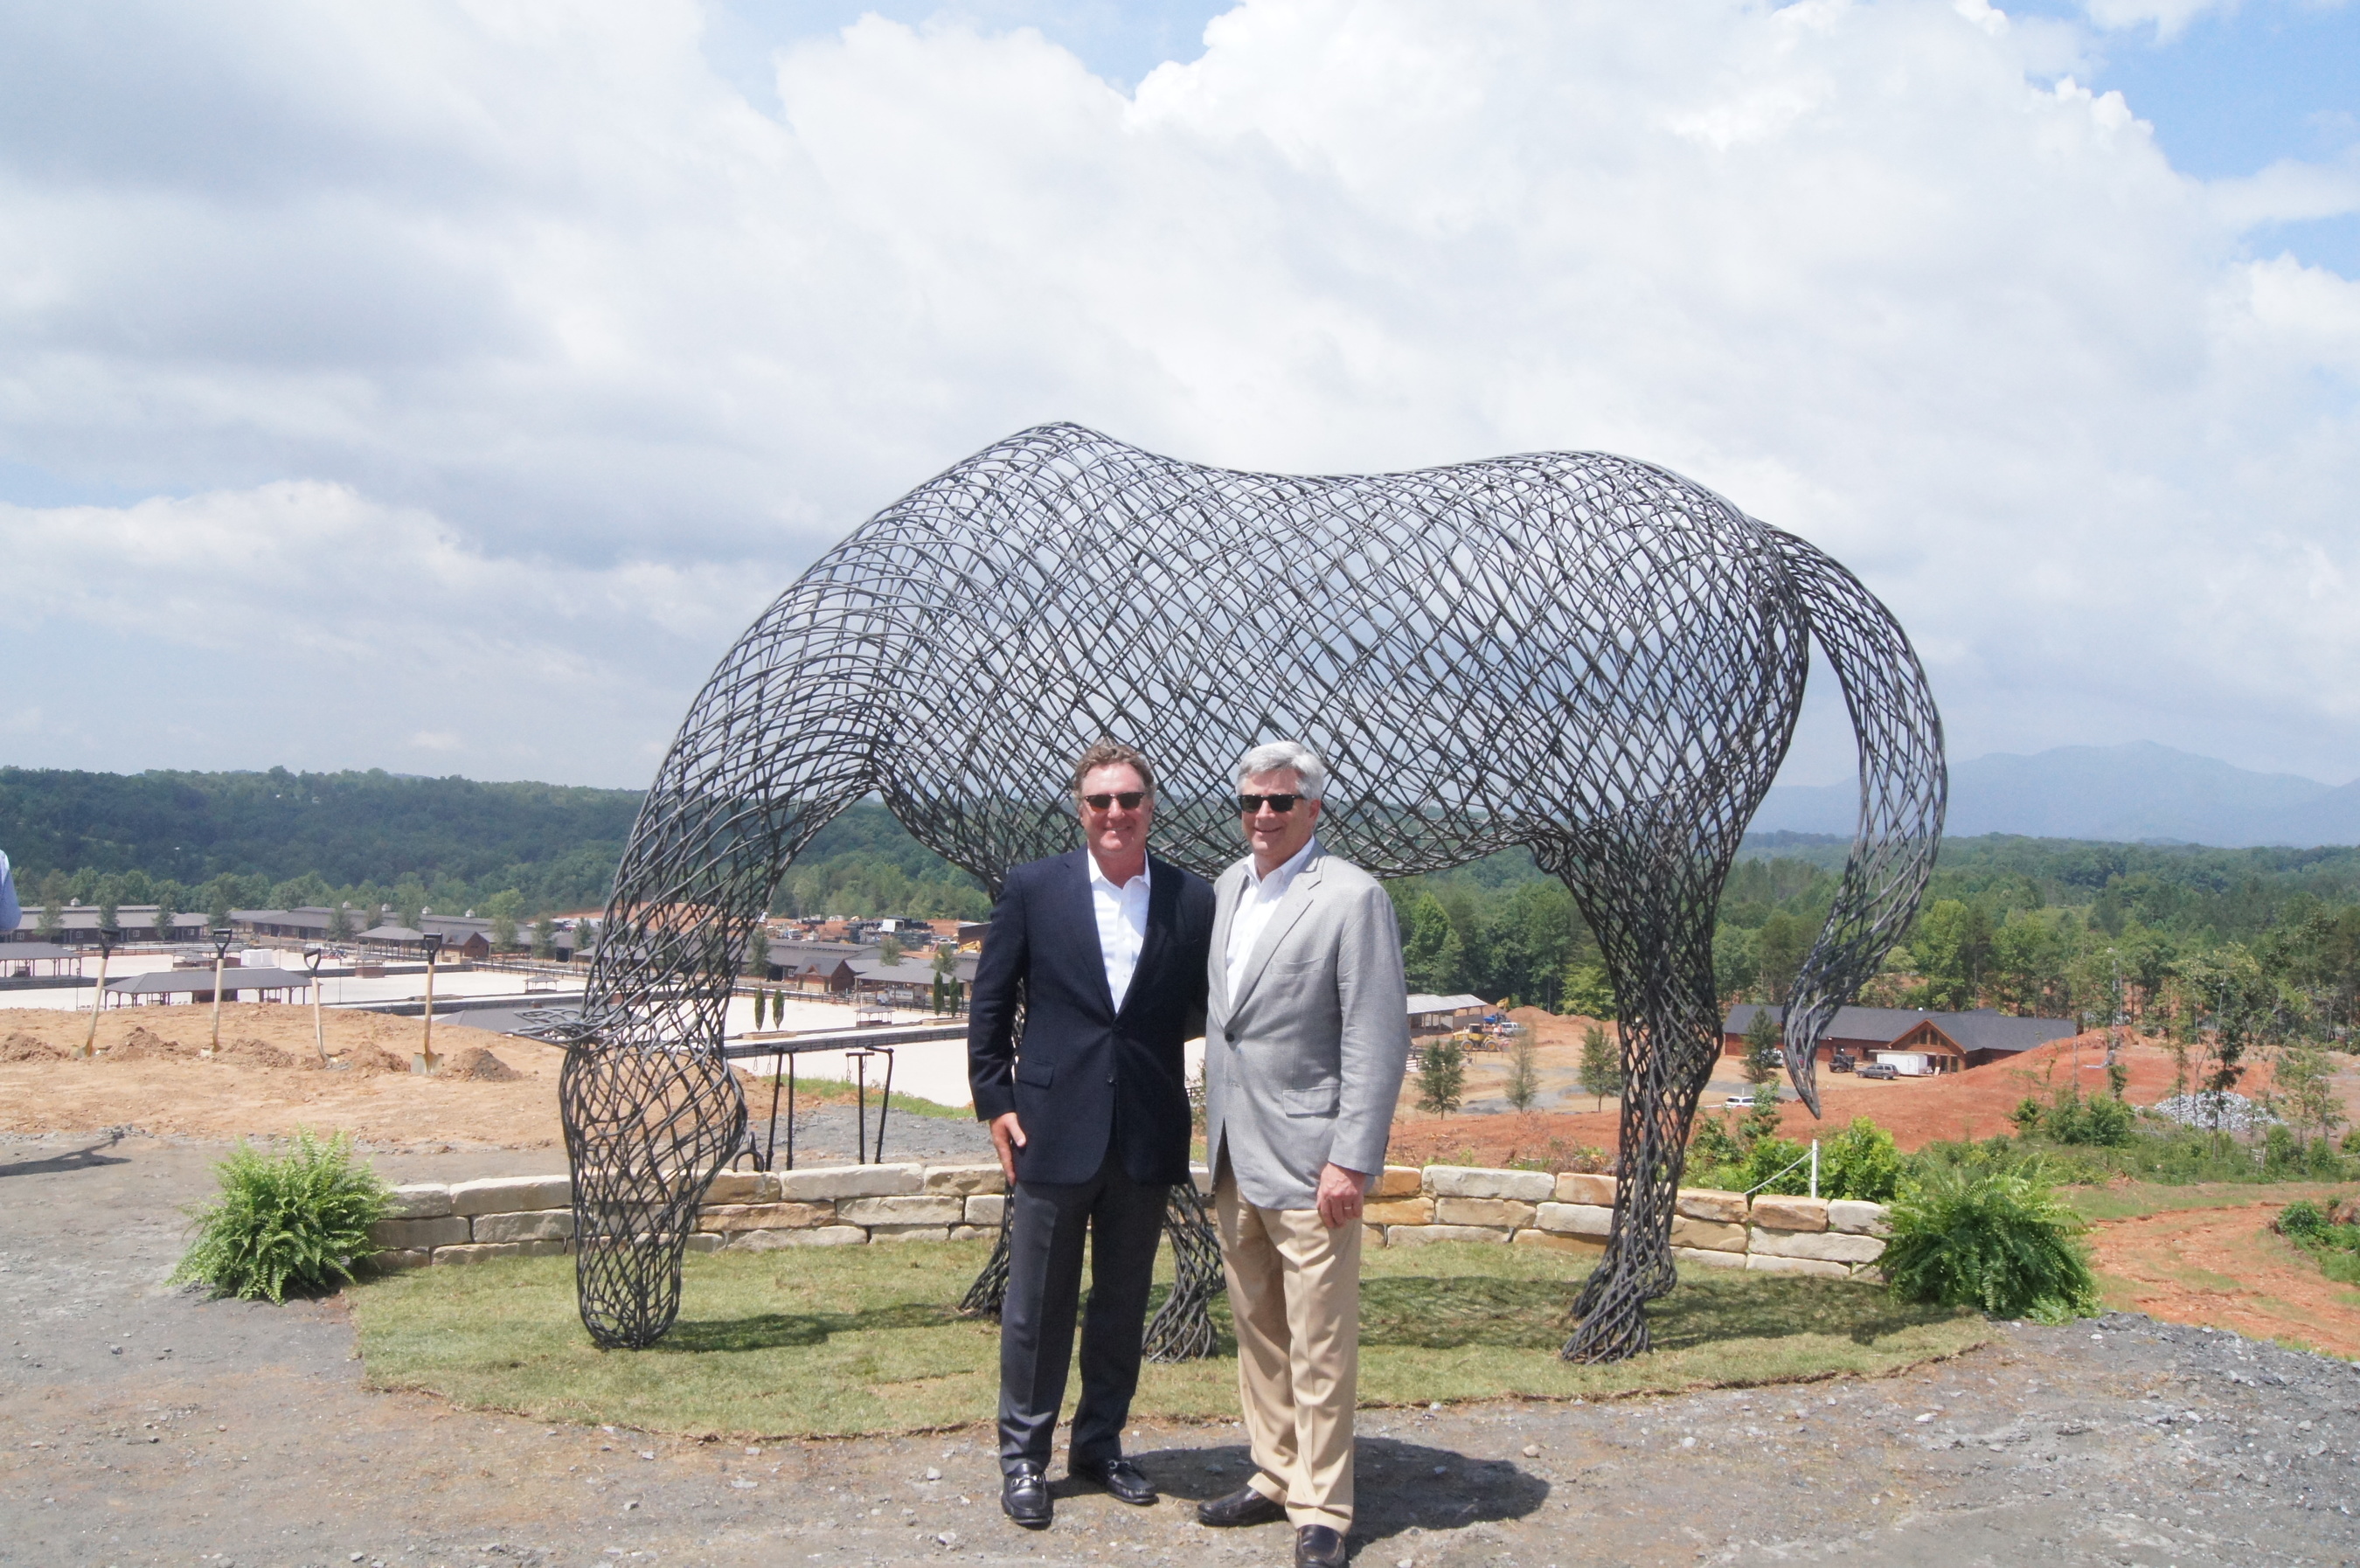 Managing Partner of Tryon International Equestrian Center, Mark Bellissimo and Chip Smith, President/Owner of Blue Ridge Log Cabins stand in front of a metal horse sculpture at the projects ground breaking press conference on Wednesday, June 25th. (PRNewsFoto/Blue Ridge Log Cabins)